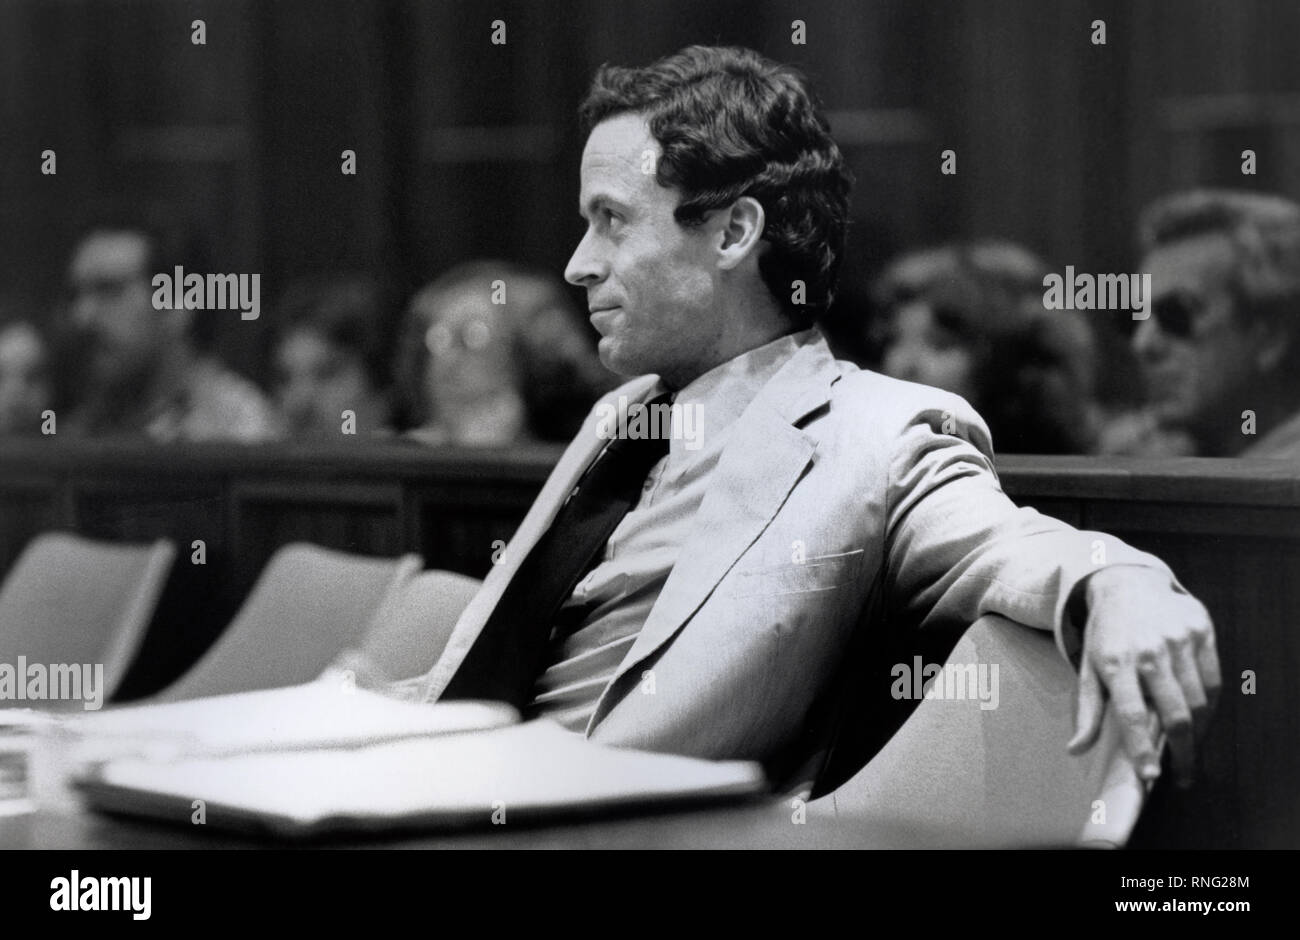 Ted Bundy Murder Trial - Miami - Theodore Robert Bundy was an American serial killer, kidnapper, rapist, burglar, and necrophile who assaulted and murdered numerous young women and girls during the 1970s and possibly earlier. After more than a decade of denials, he confessed to 30 homicides that he committed in seven states between 1974 and 1978. Stock Photo